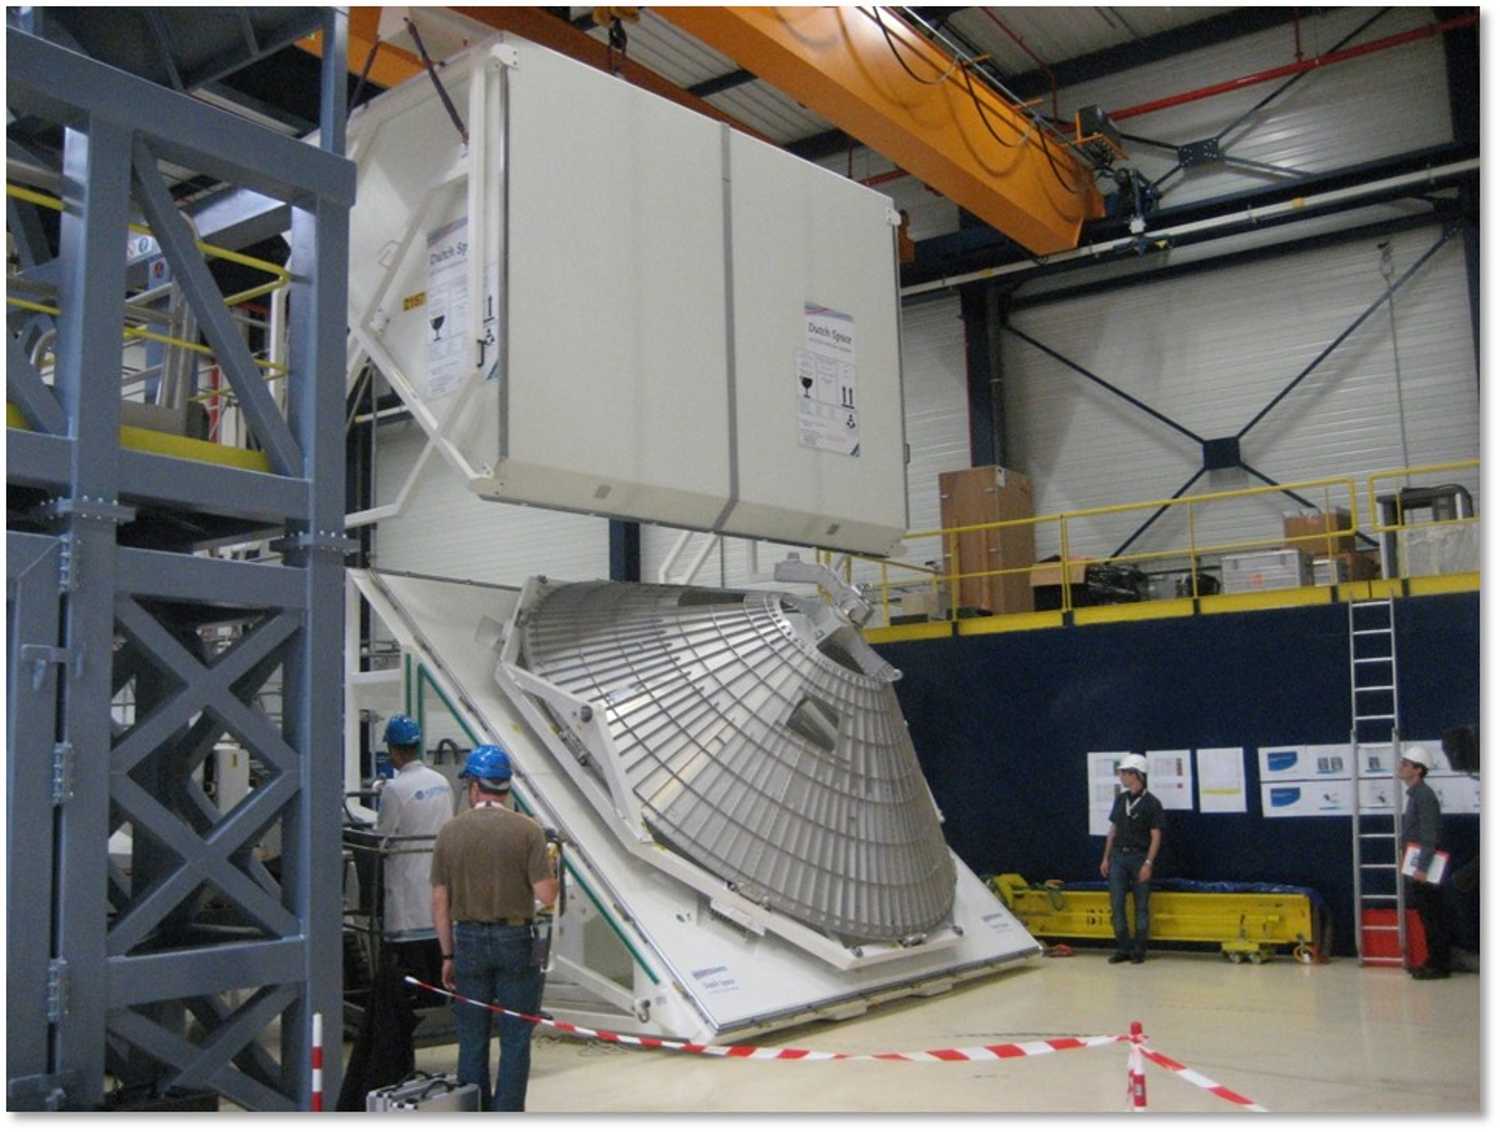 Storage and transport containers for Ariane programme